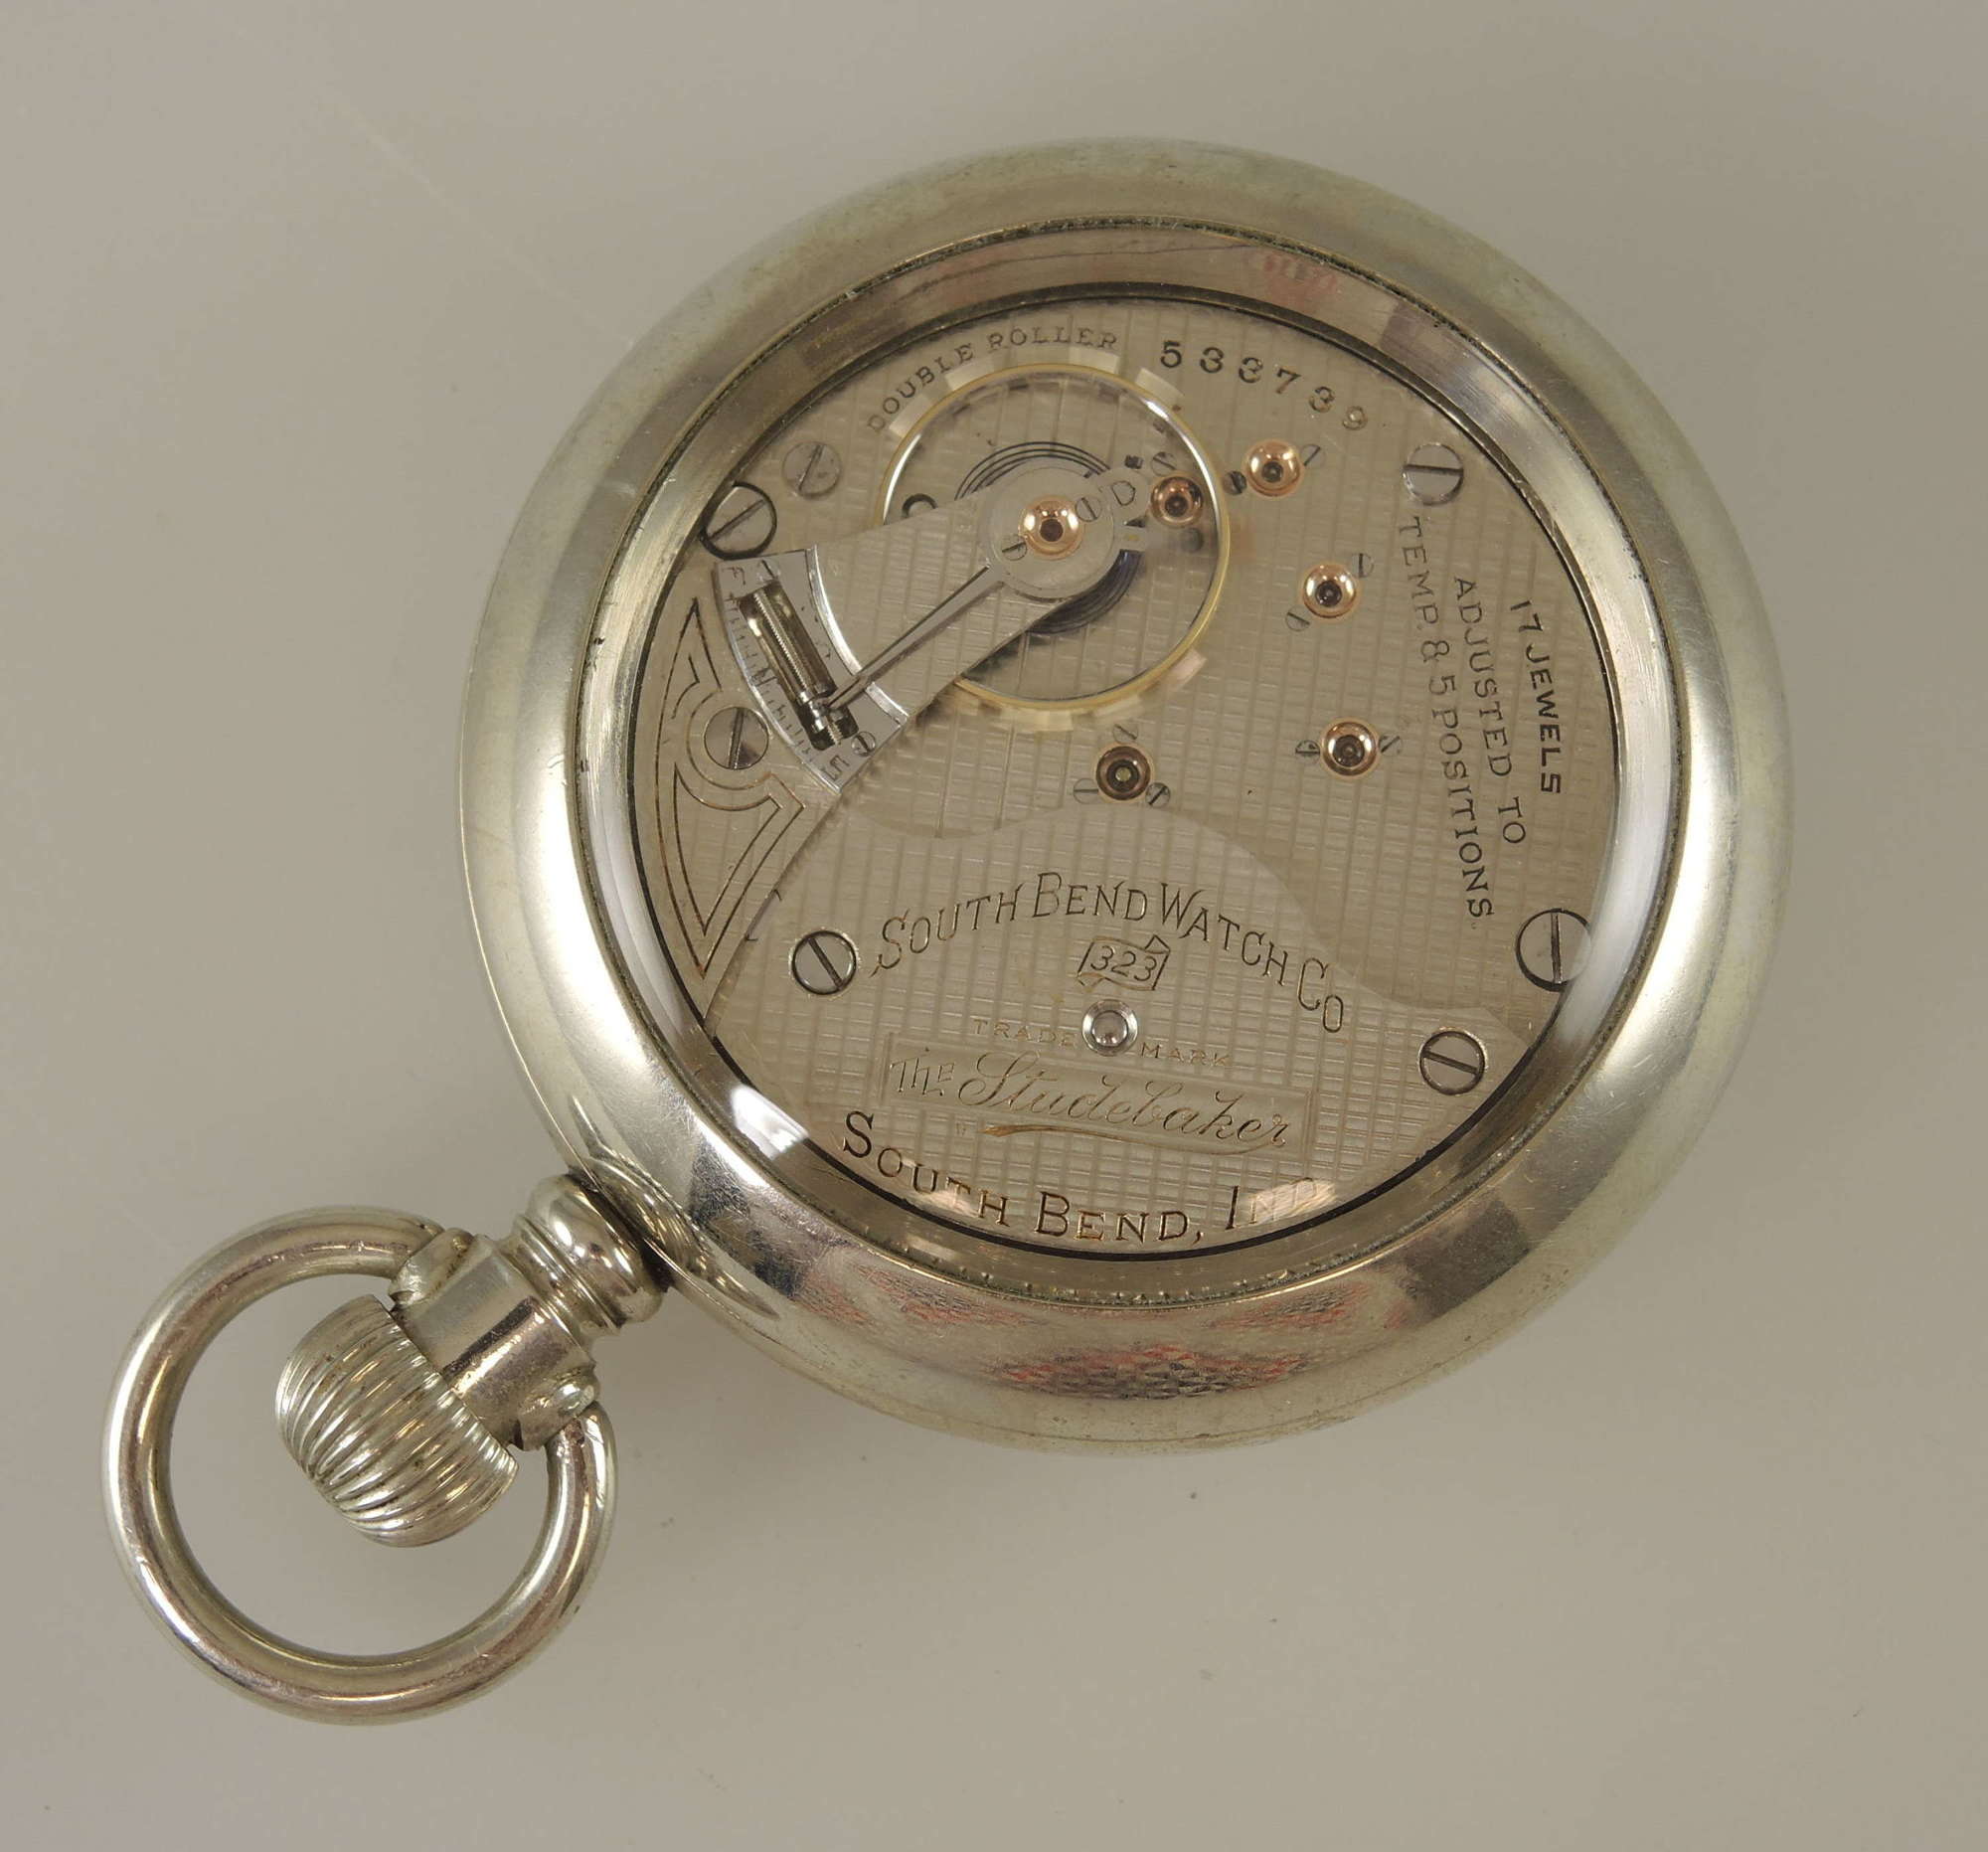 18s 17J South Bend The Studebaker 323 display cased pocket watch c1908